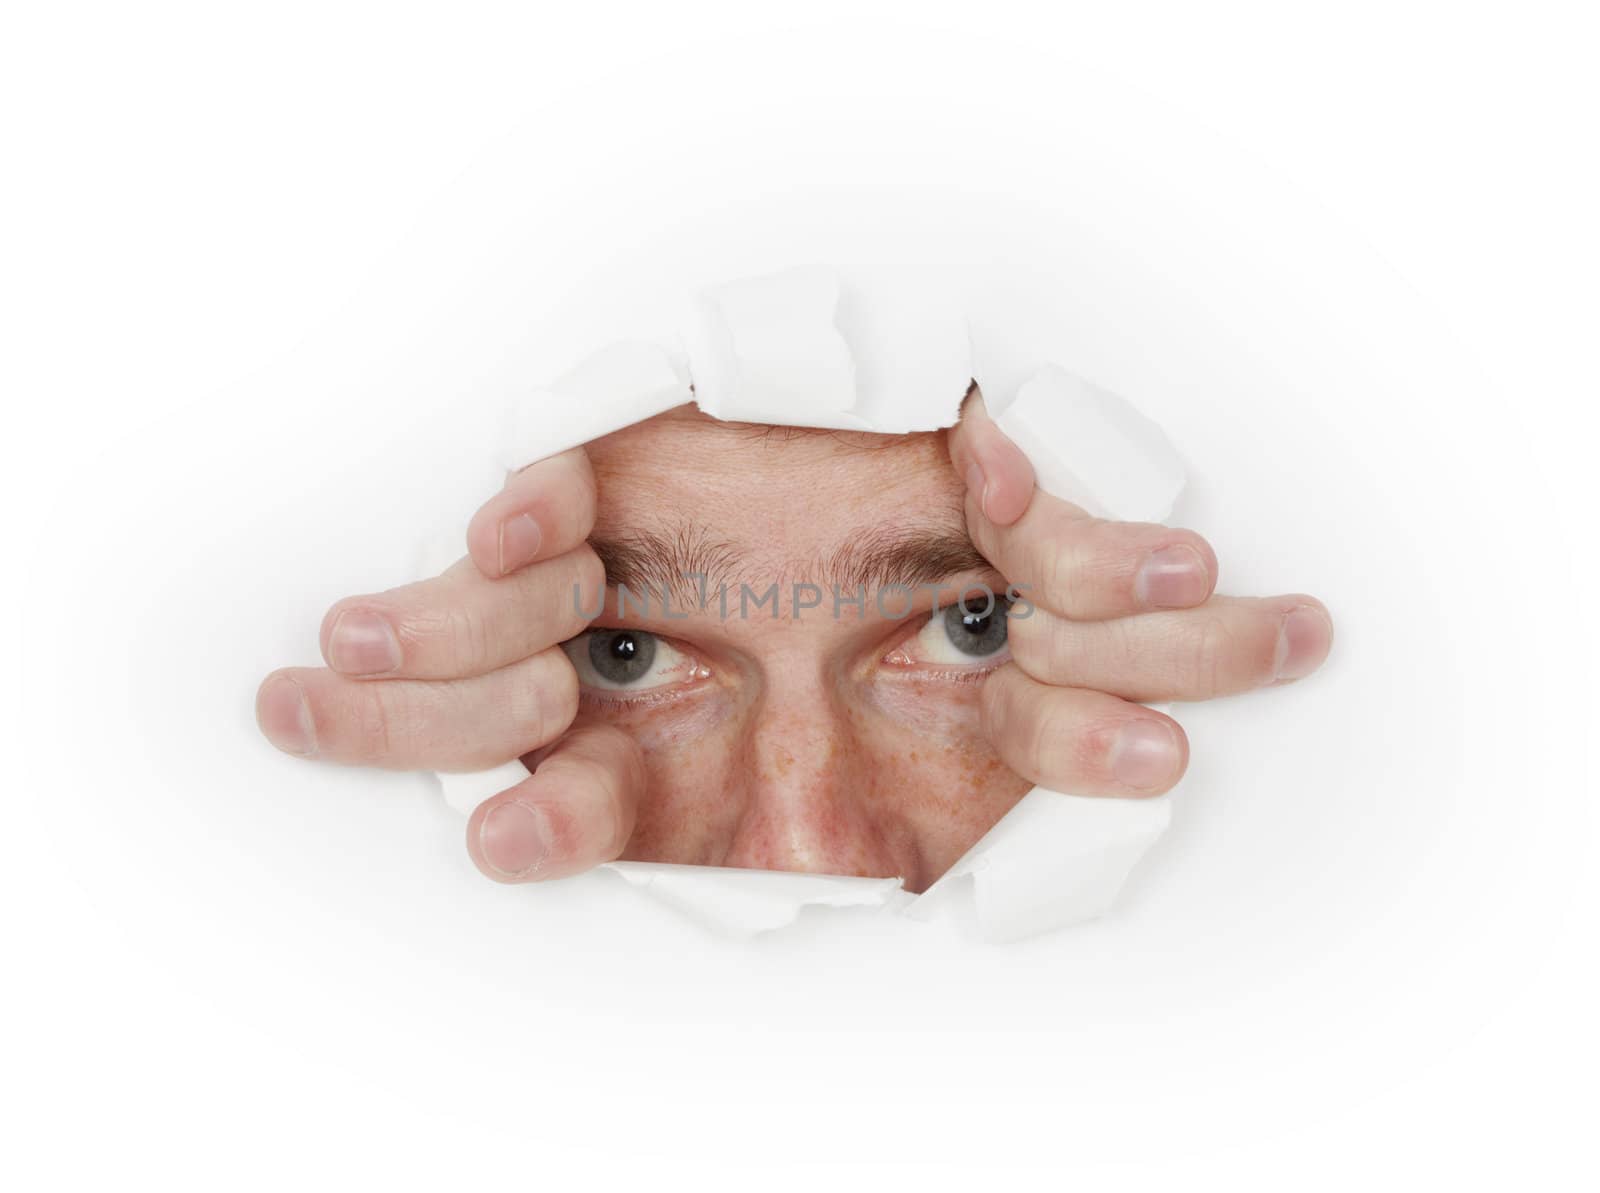 A man looks out from a hole in the white paper